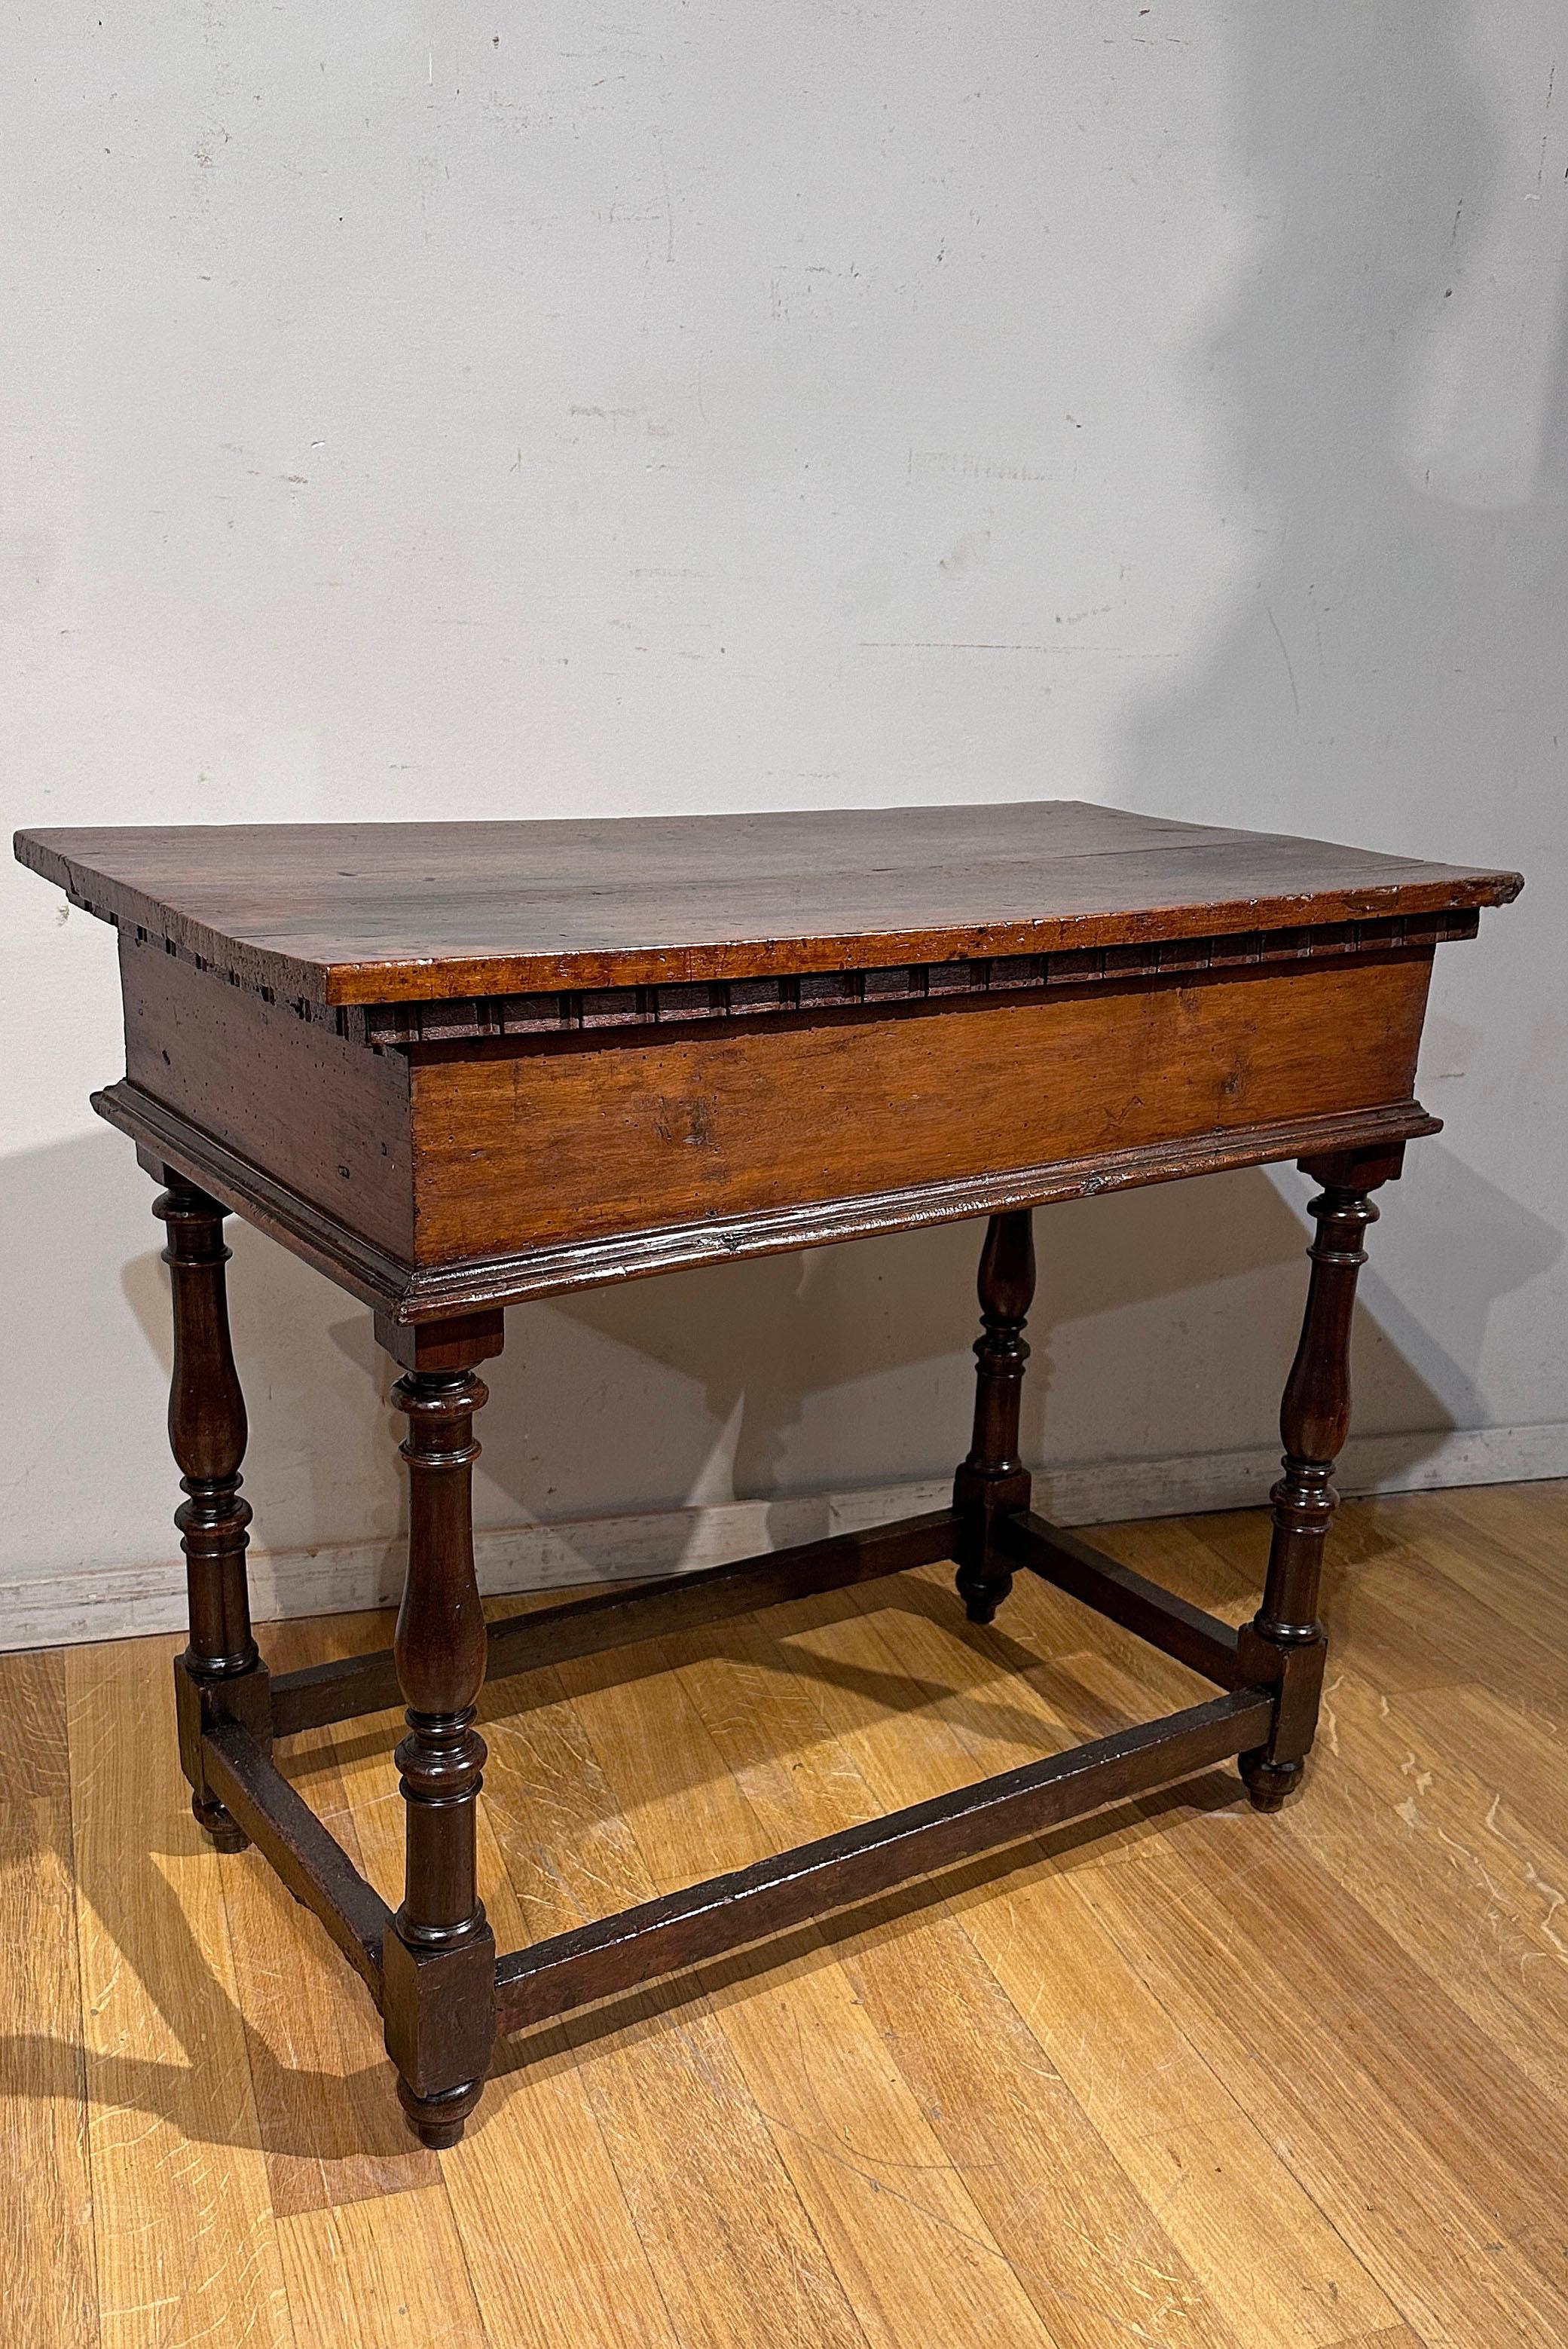 Wood END OF THE 16th CENTURY LOUIS XIV TABLE WITH DRAWER For Sale